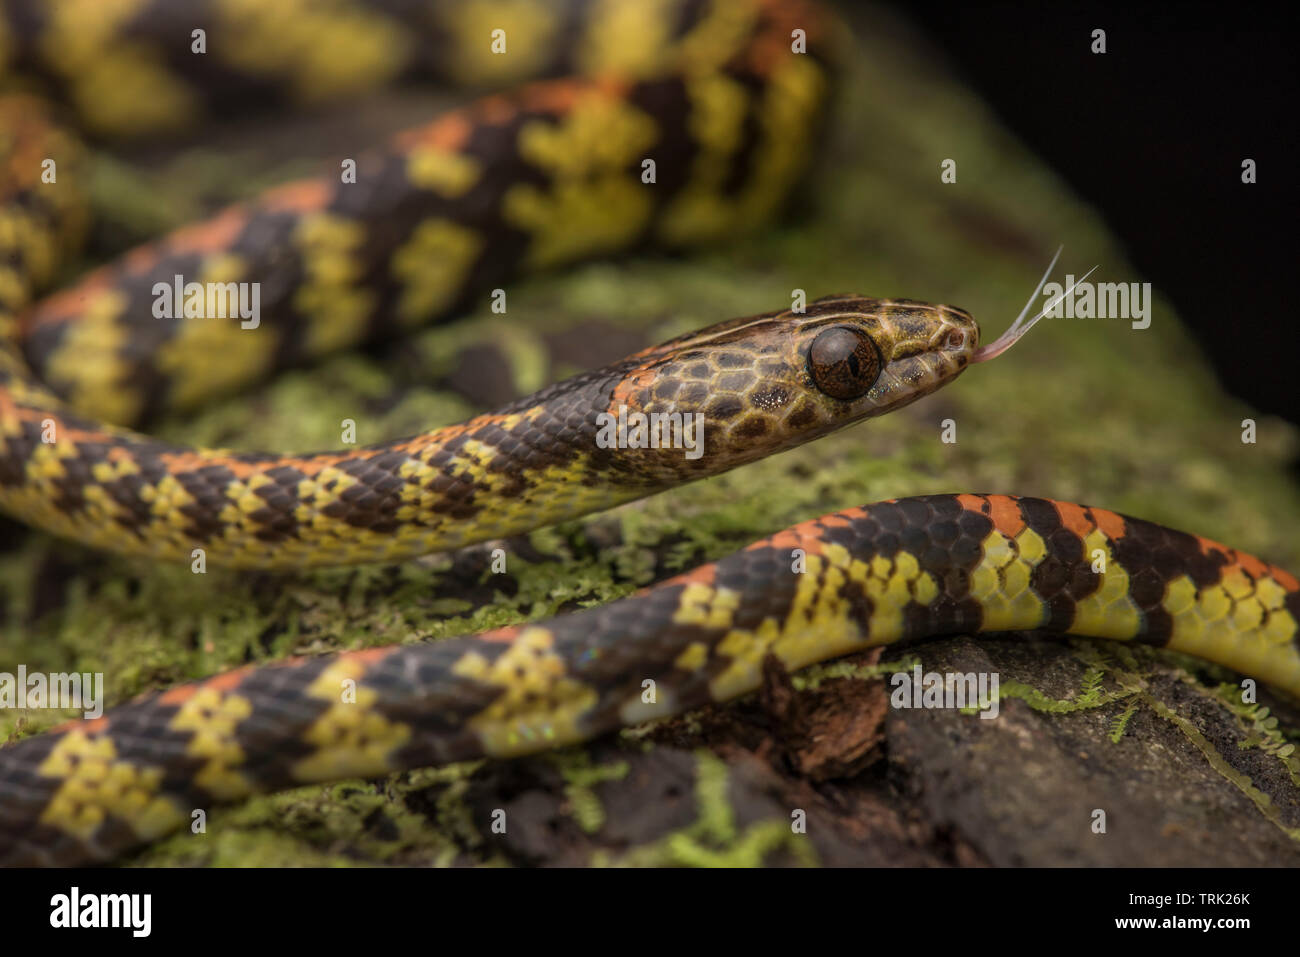 A panama spotted night snake (Siphlophis cervinus) it is harmless and feeds mainly on lizards. Stock Photo